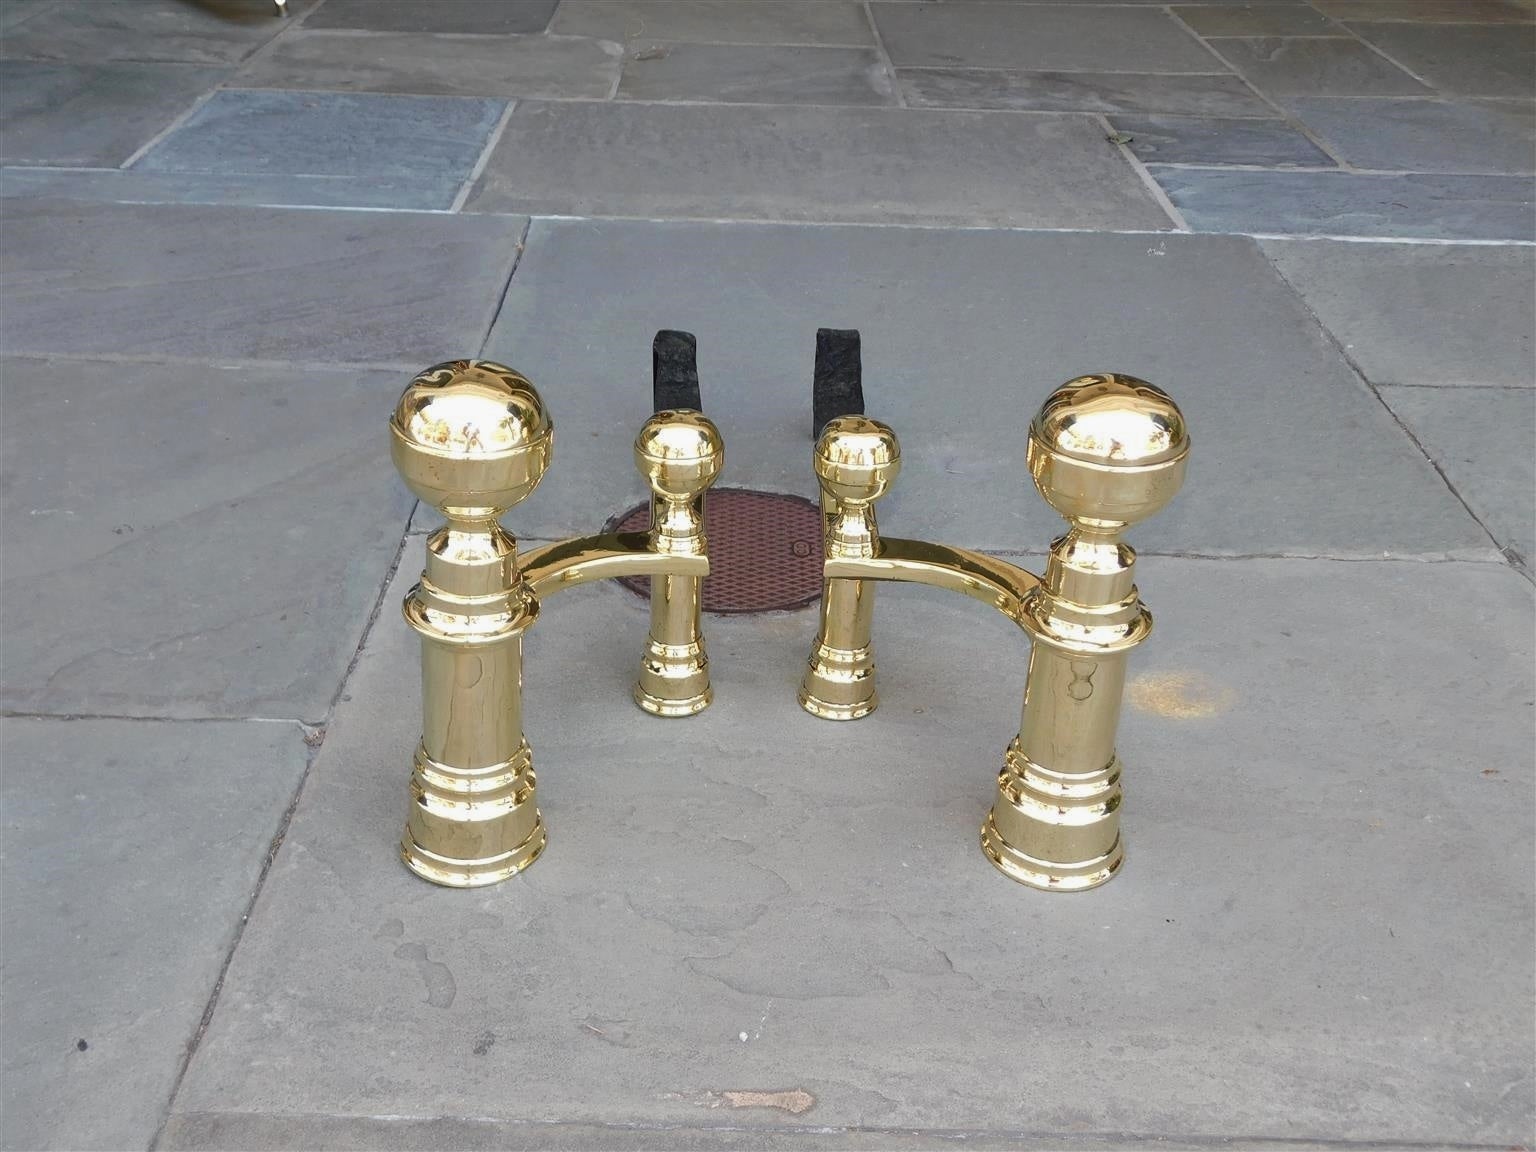 Pair of American brass banded flanking ball finial andirons with circular ringed plinths, matching curvature banded log stops, and resting on the original wrought iron rear dog legs. Stamped by maker John Hunneman, Boston. Early 19th century.